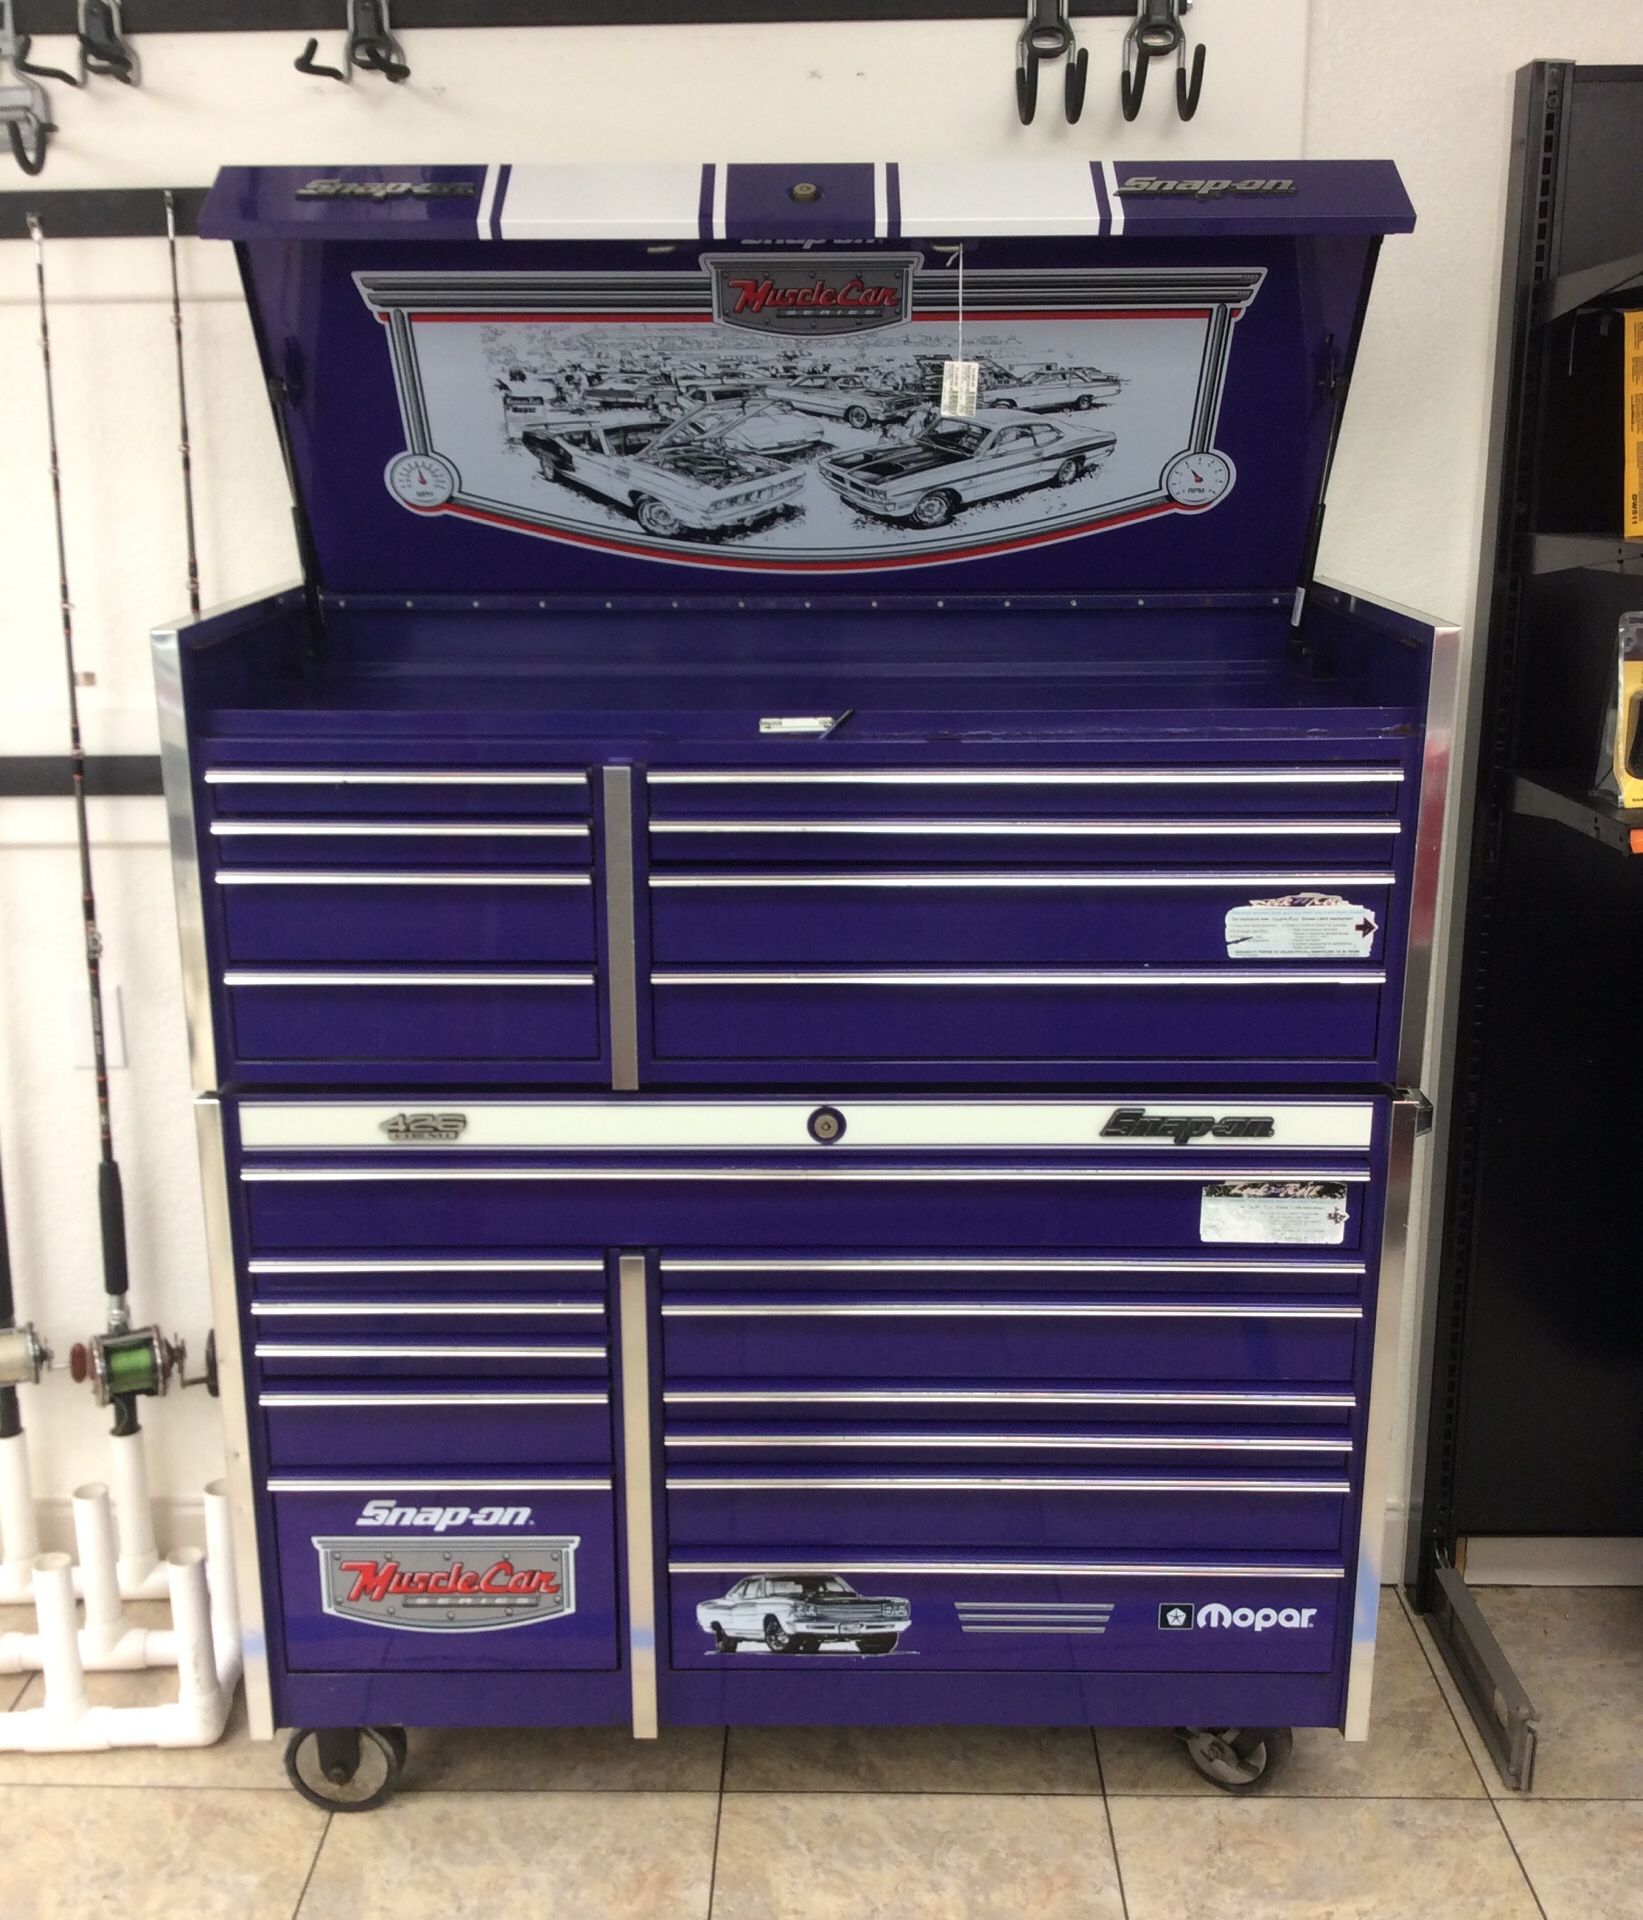 Snap on mopar muscle car limited edition plum crazy tool box